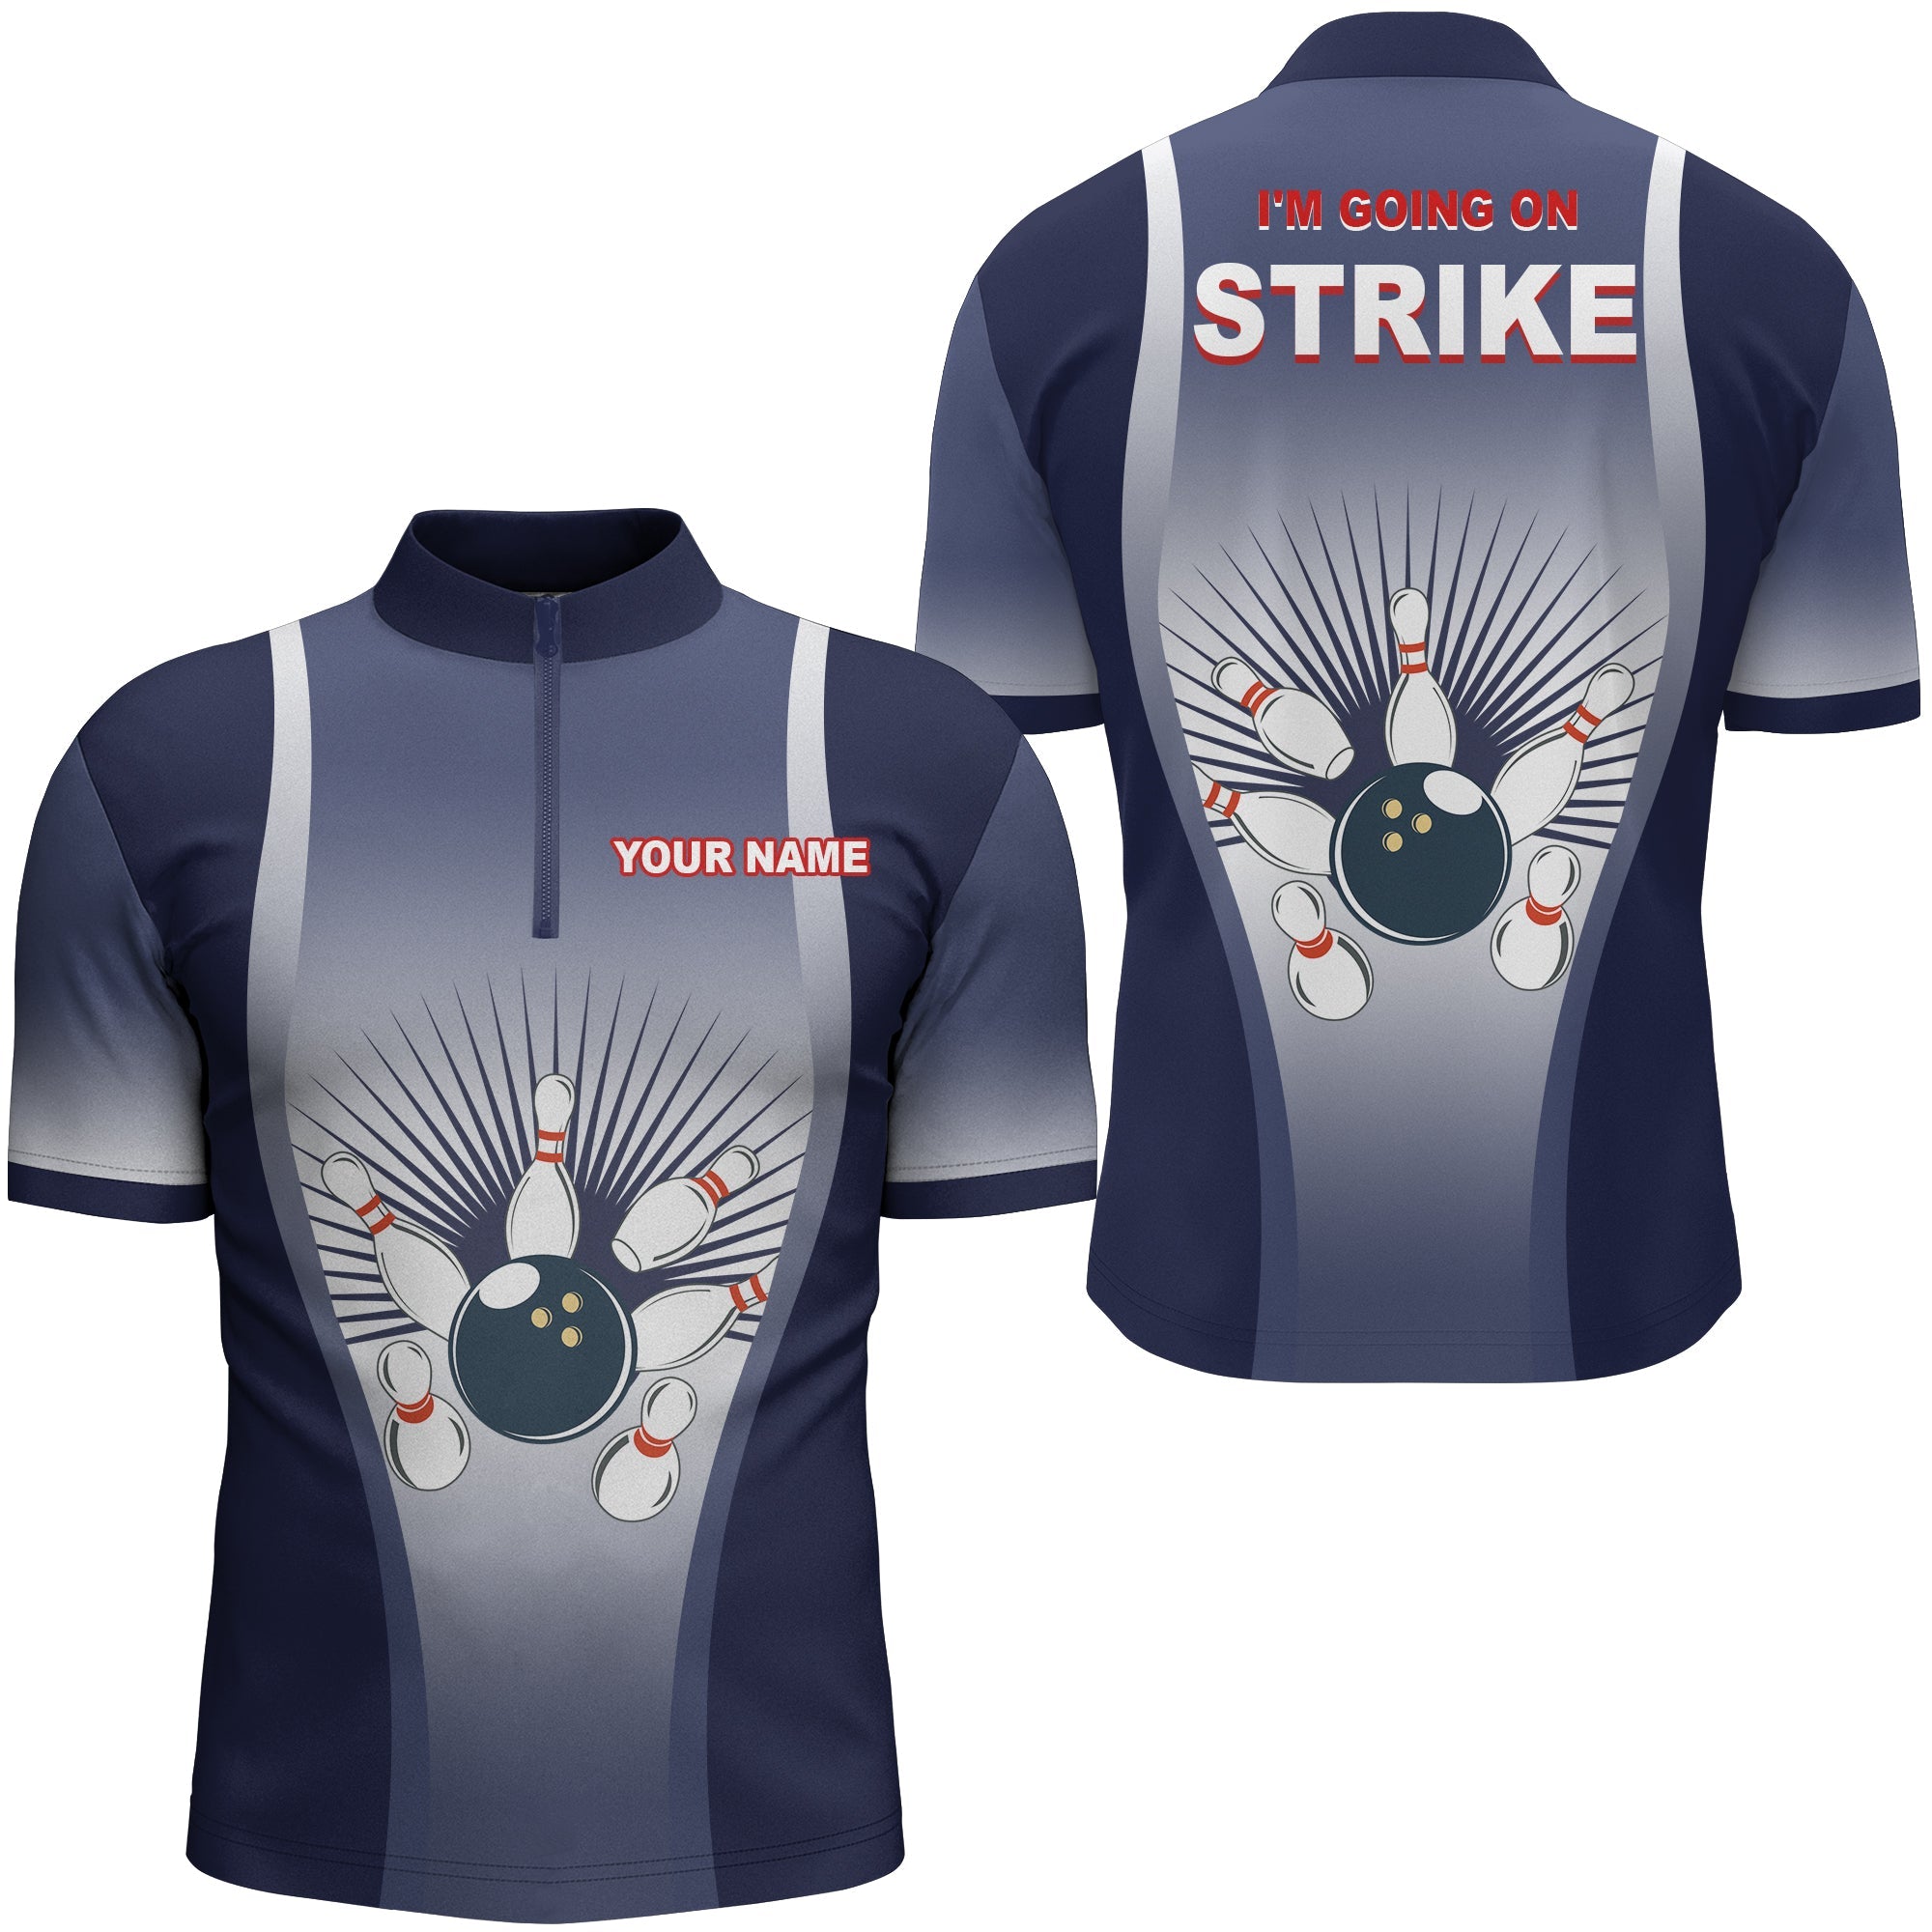 I''m Going on Strike Bowling Shirt for Men Quarter-Zip Personalized Blue Men Bowlers Team Bowling Jersey